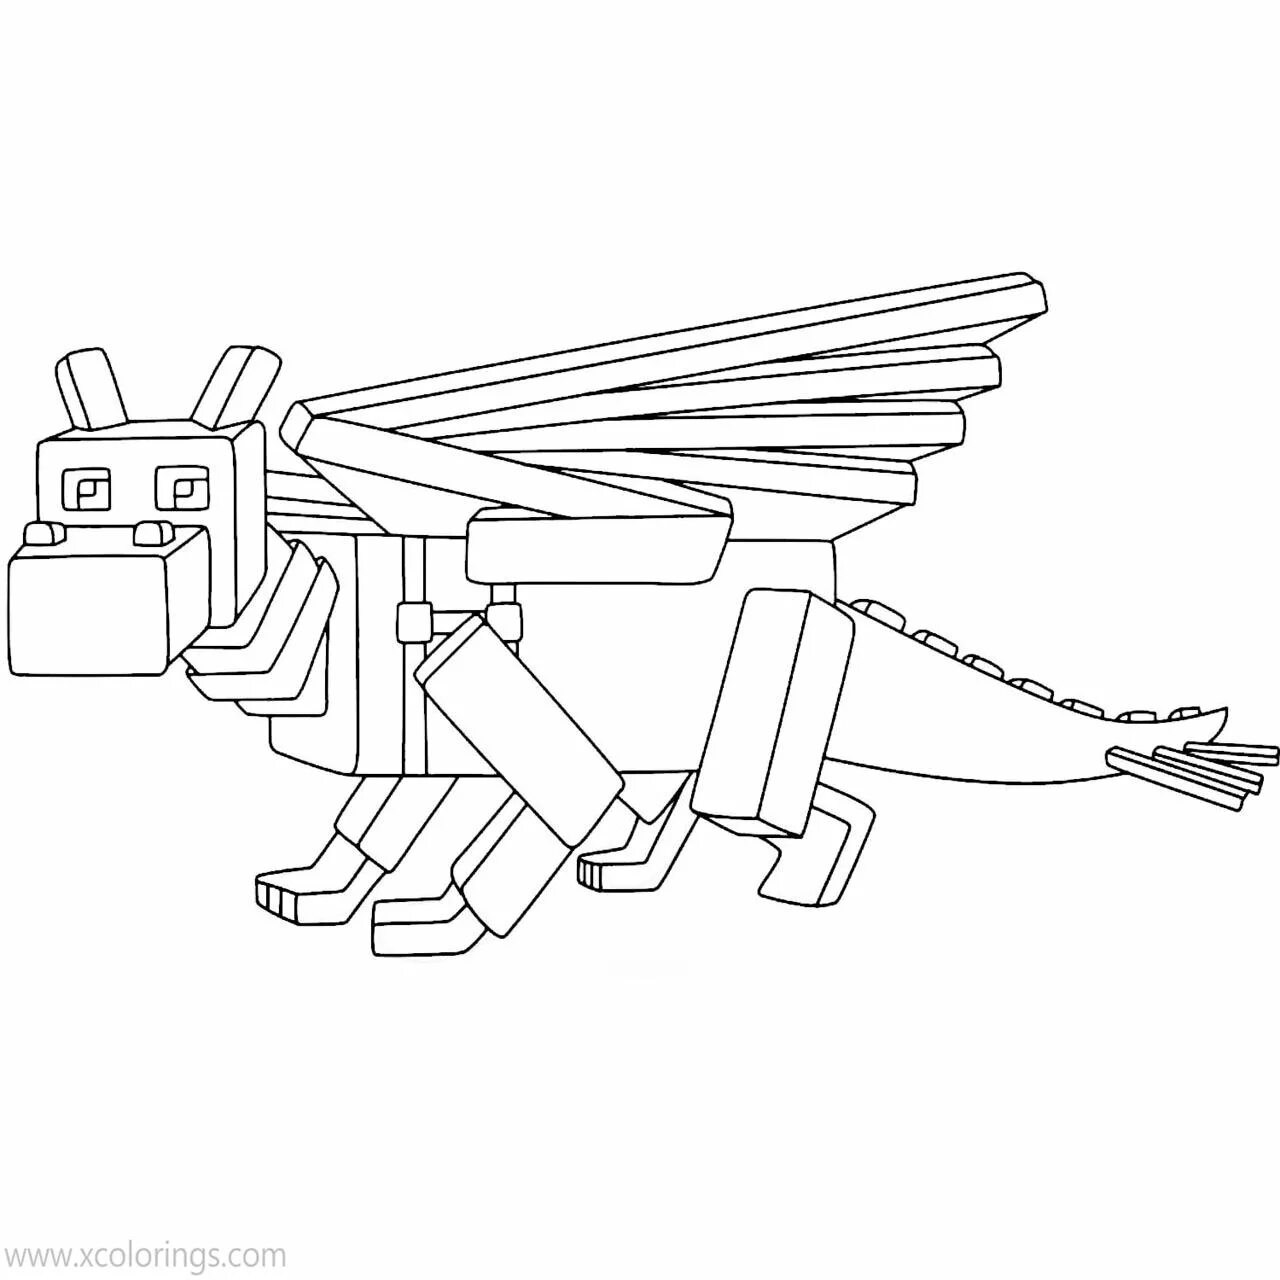 Brilliantly colored minecraft ender dragon coloring page